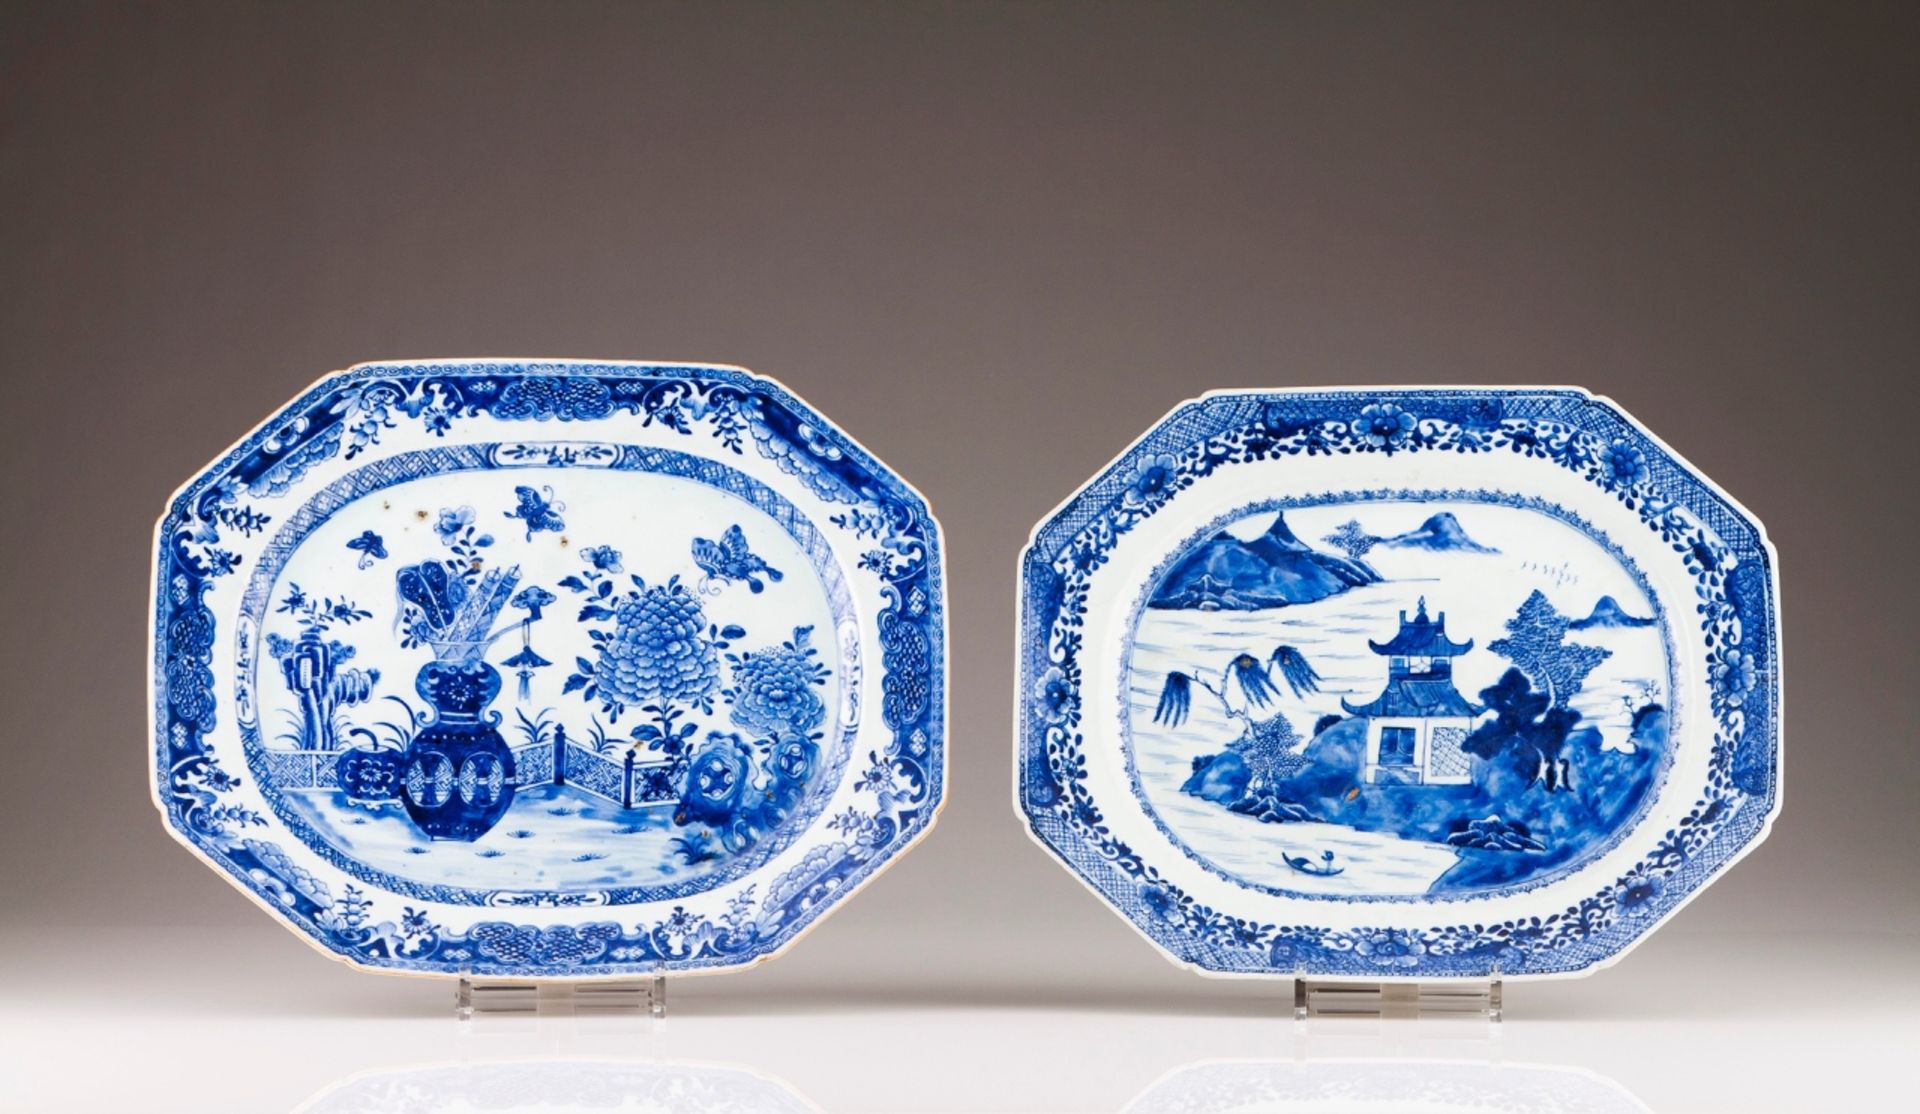 A Qianlong scalloped dish
Chinese export porcelain
Blue decoration with riverscape and pagoda